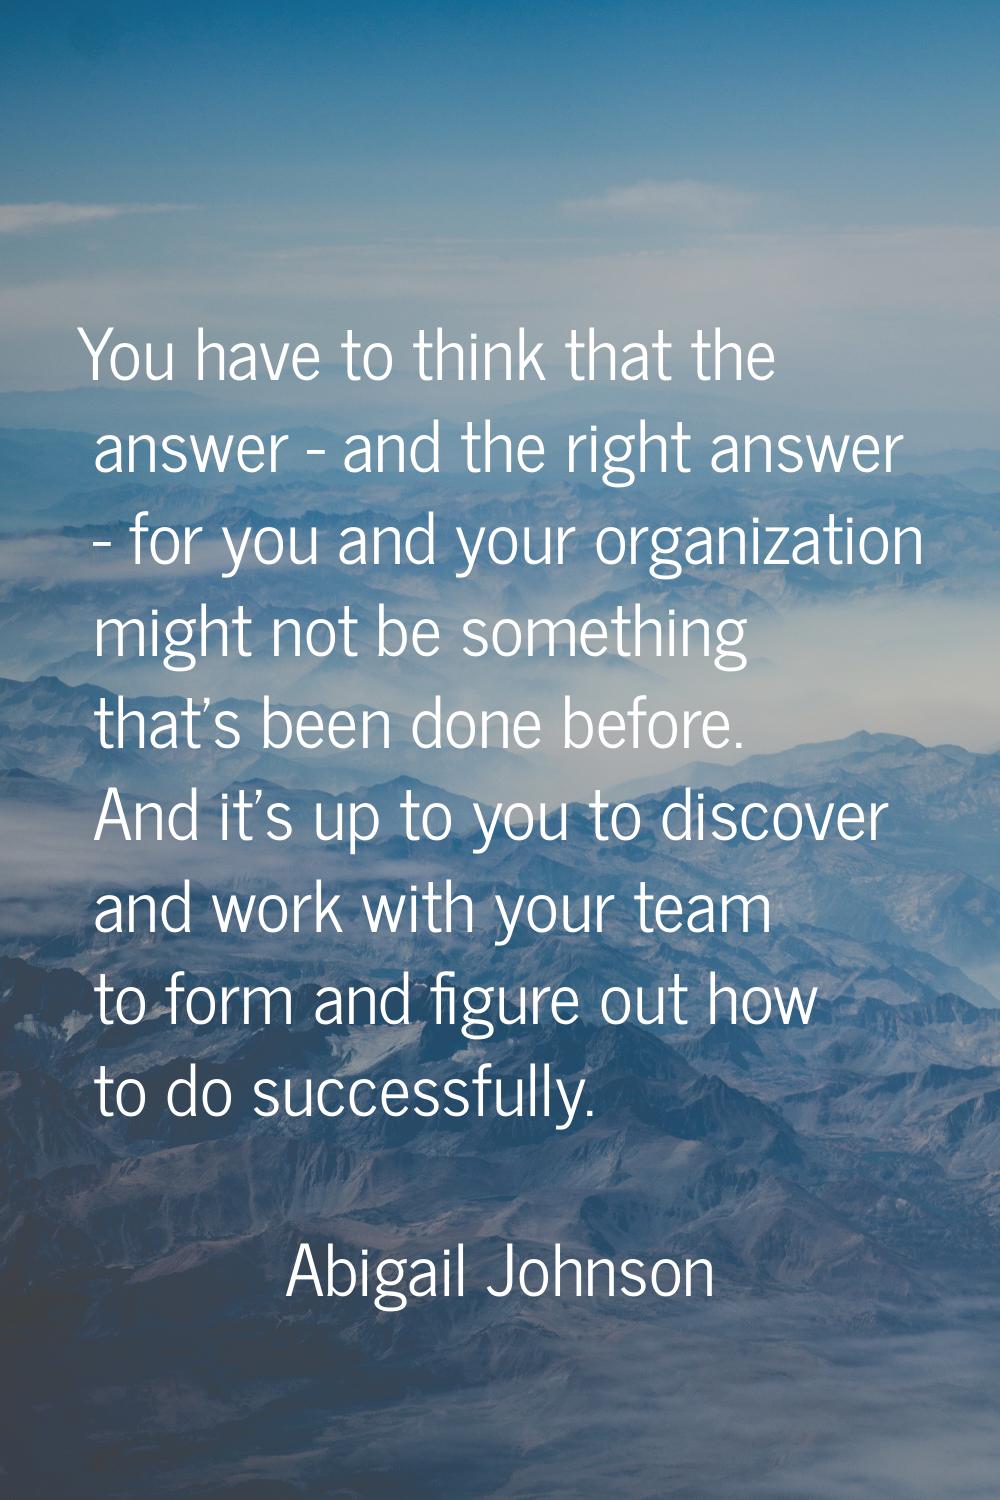 You have to think that the answer - and the right answer - for you and your organization might not 